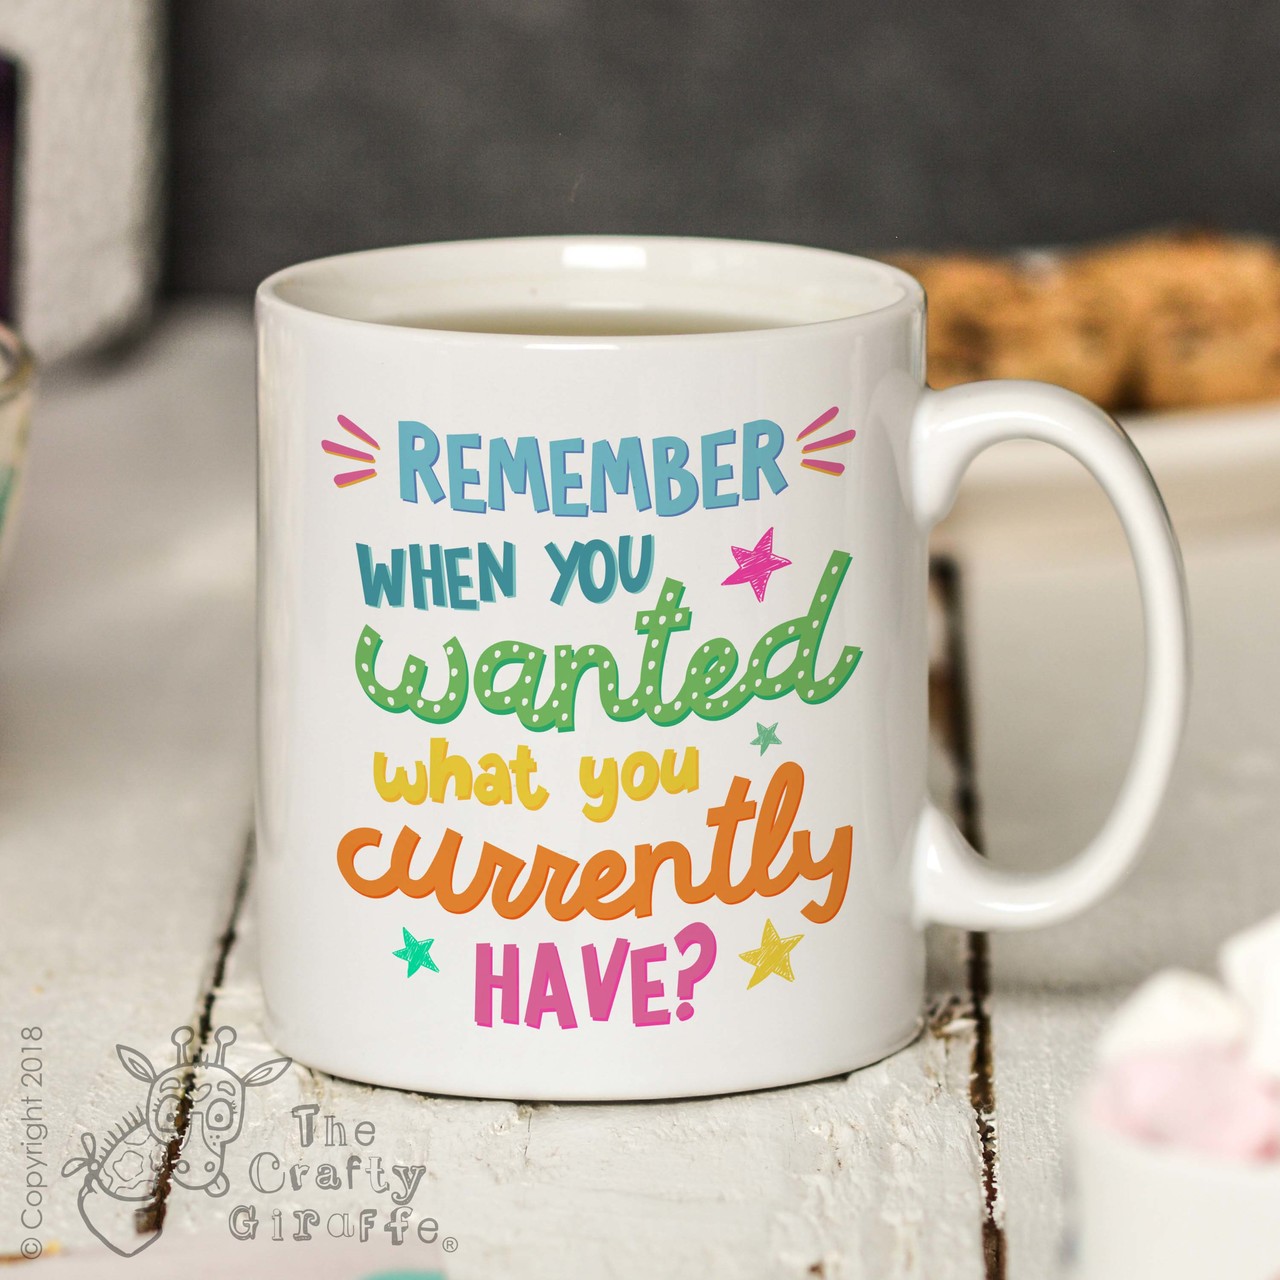 Remember when you wanted what you currently have? Mug